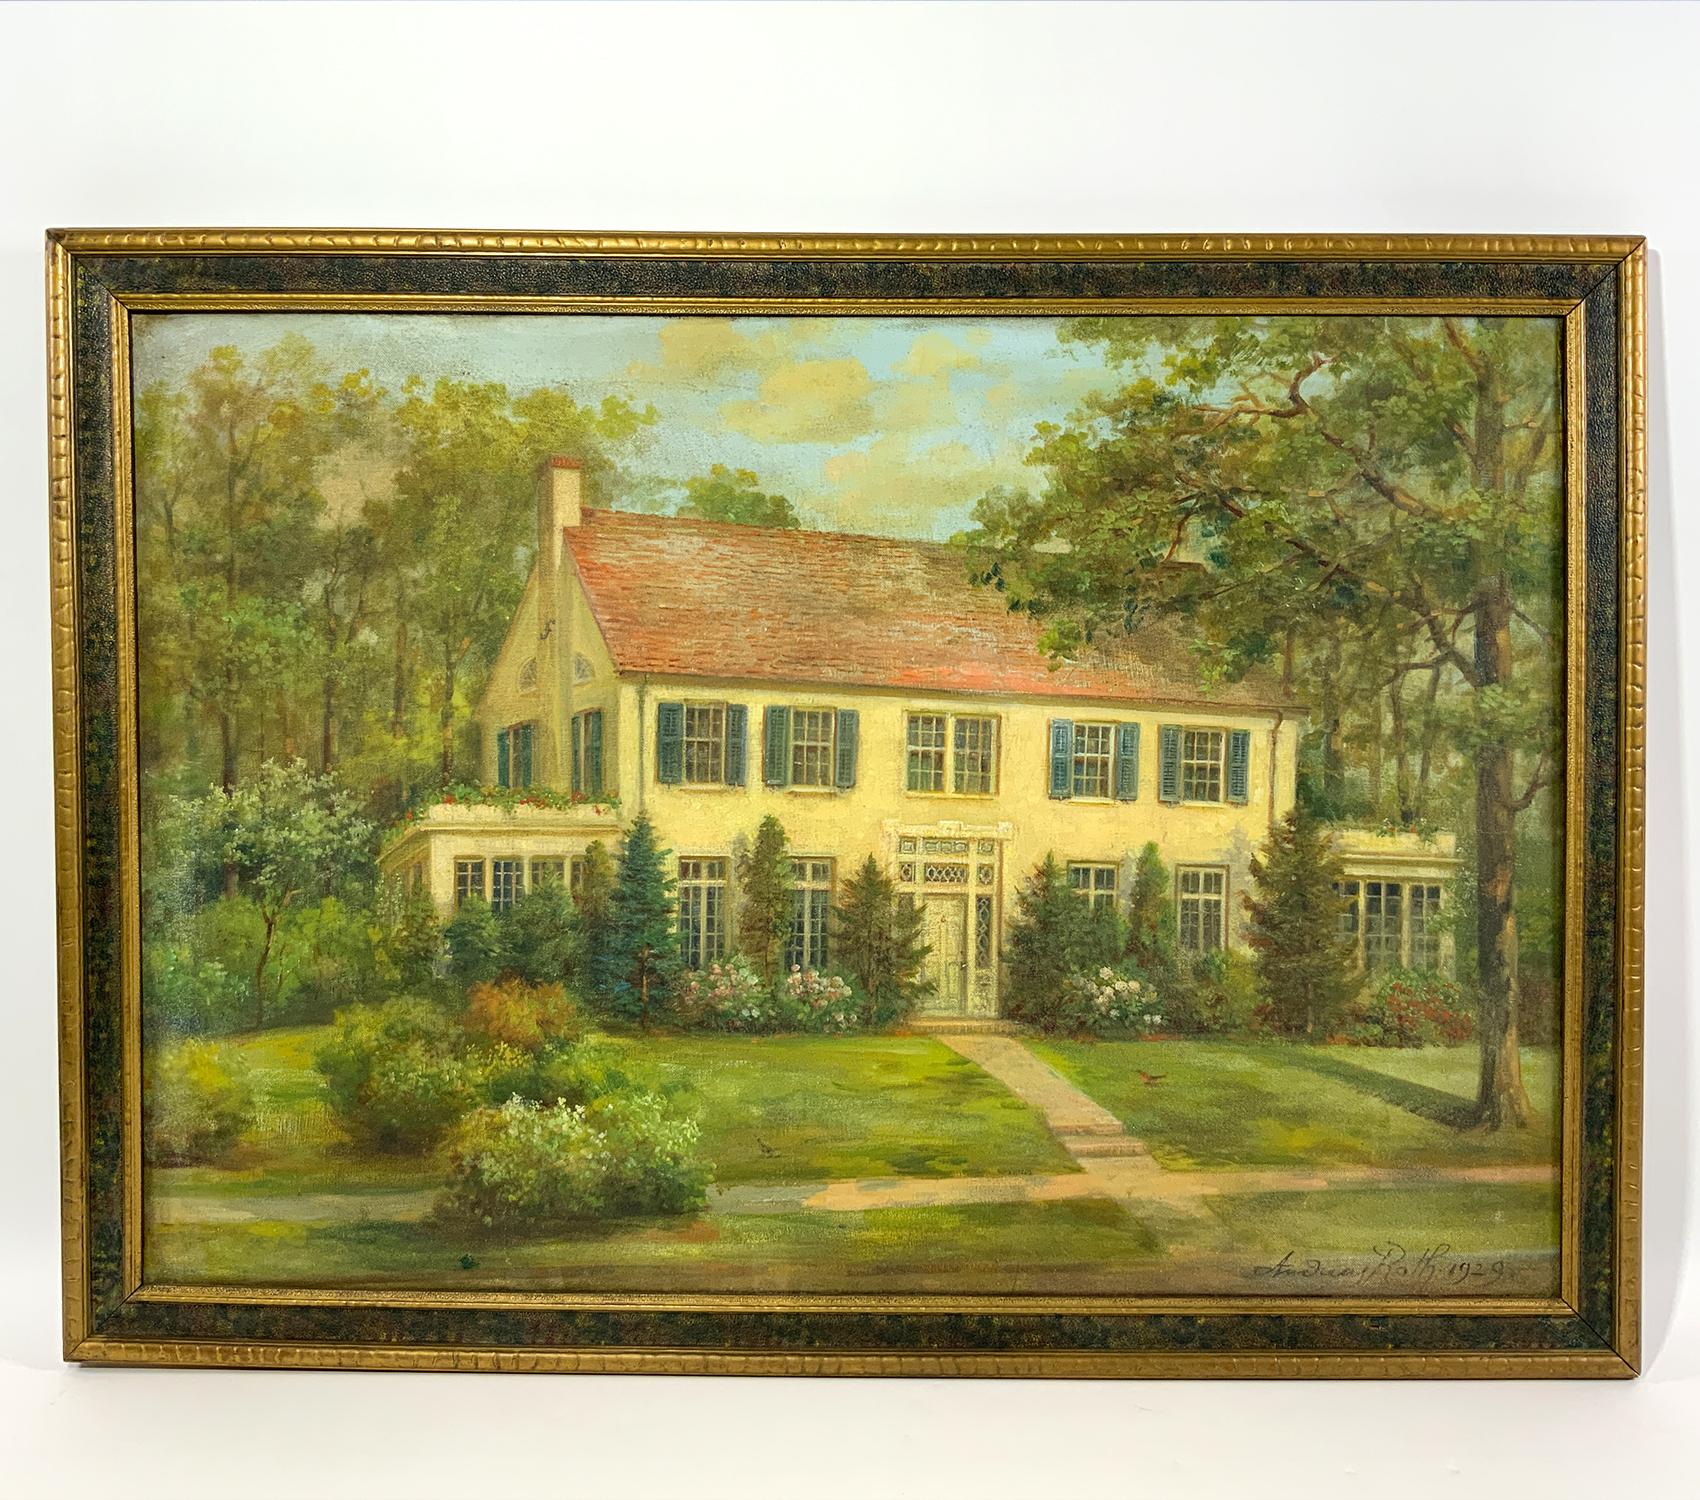 Painting of a large colonial mansion by Andreas Roth, a German American artist. Signed lower right, Andreas Roth 1929. He lived from 1871-1949. He studied at the University of Munich. Wood framed.